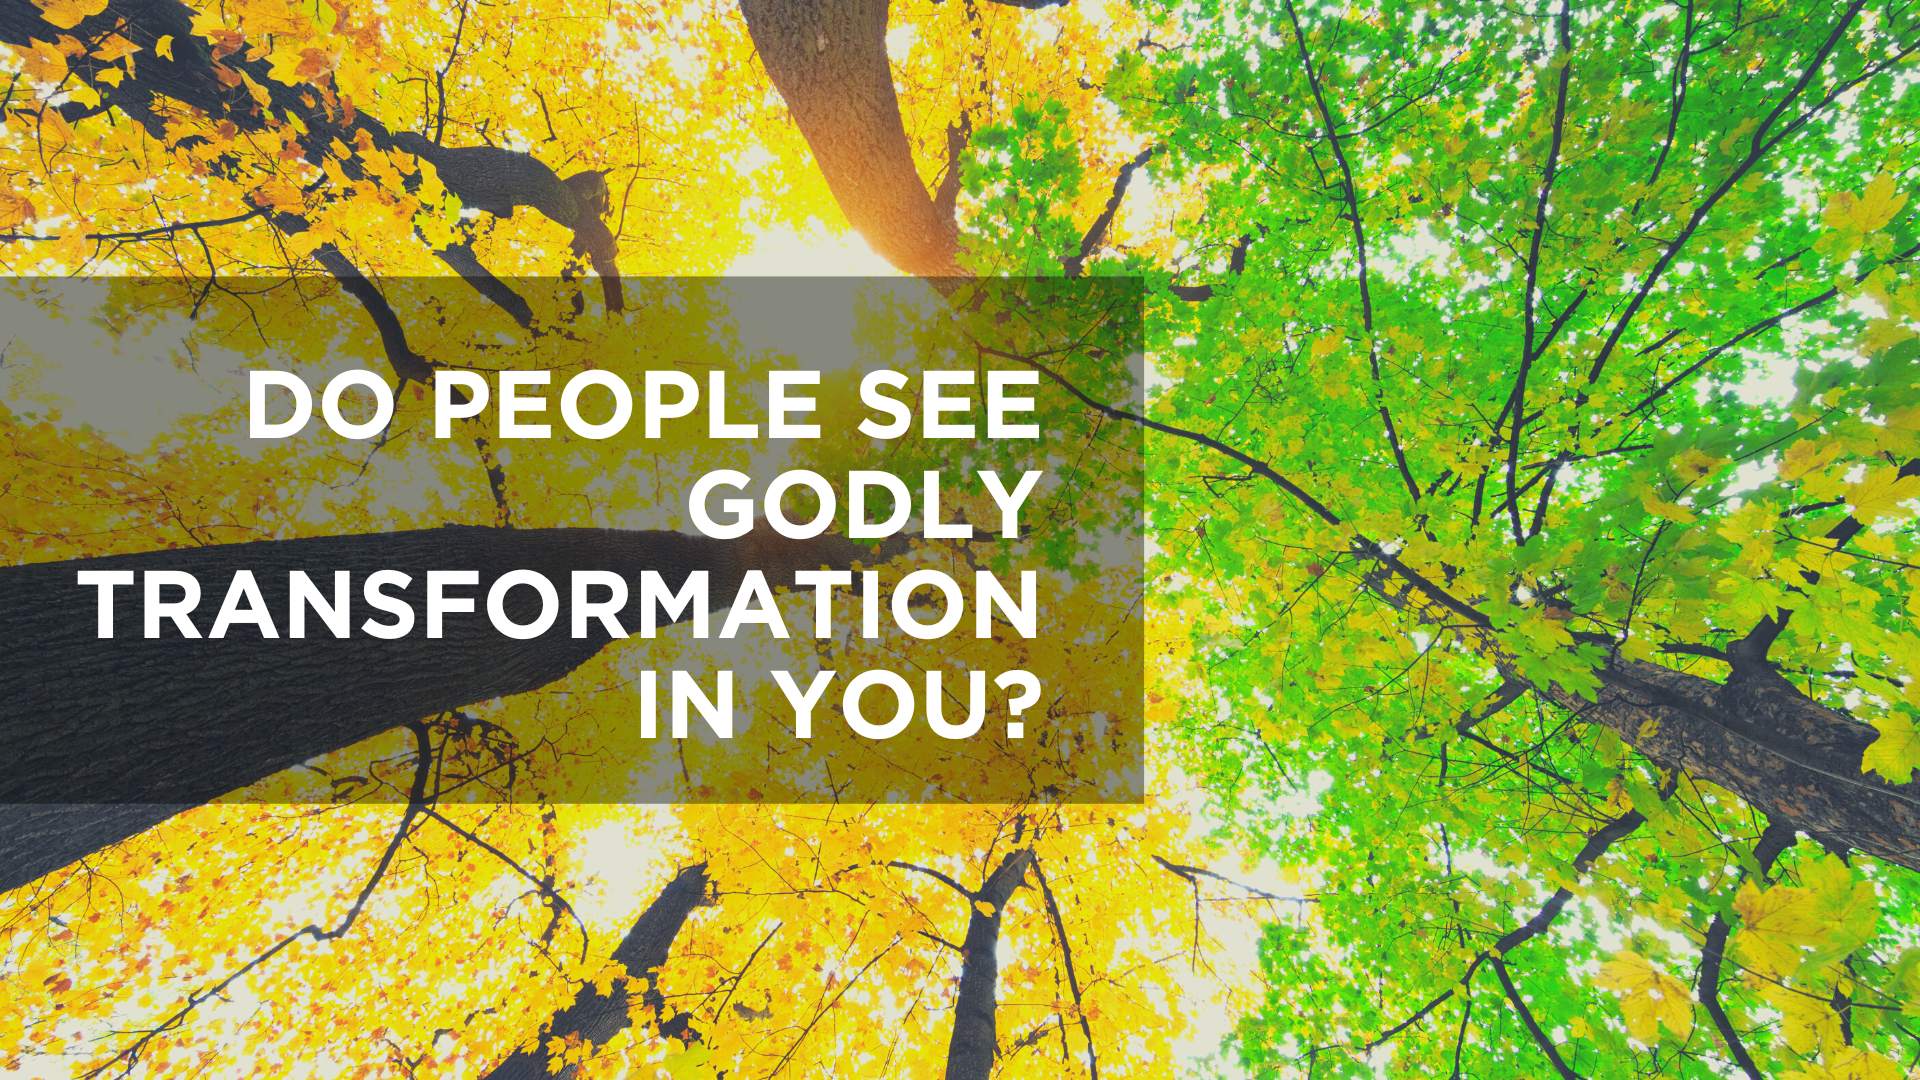 Do People See Godly Transformation in You?